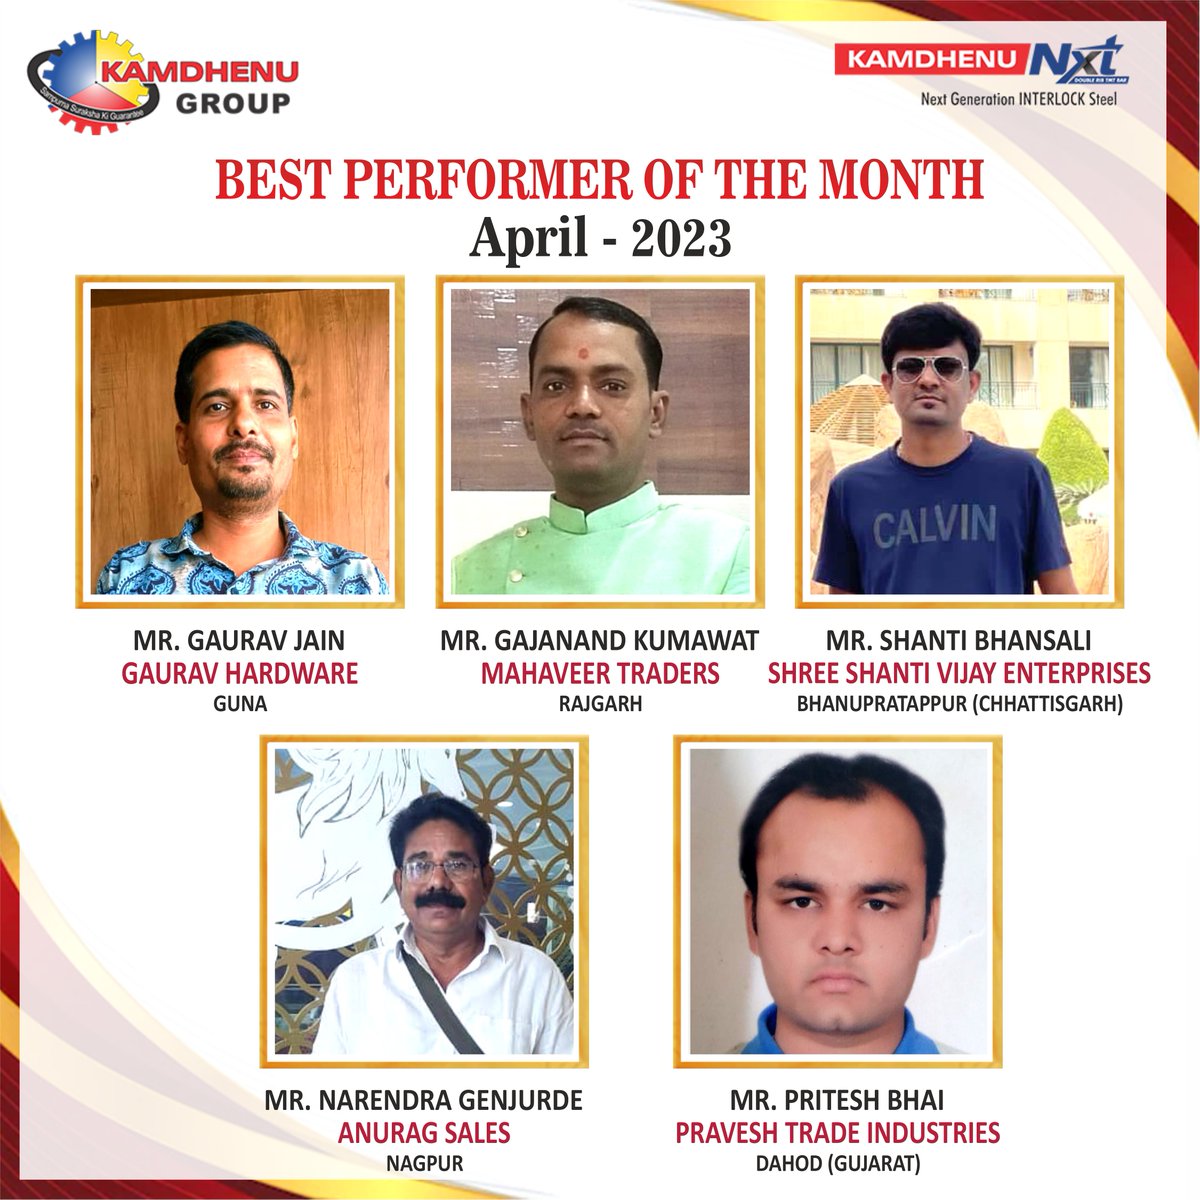 The pursuit of excellence is a continuous journey & it's inspiring to see our top performers for April 2023 making steady strides in achieving their business goals. Kamdhenu Group is proud to recognize their hard work & commitment.

#DealerOfTheMonth #BestPerformer #KamdhenuGroup